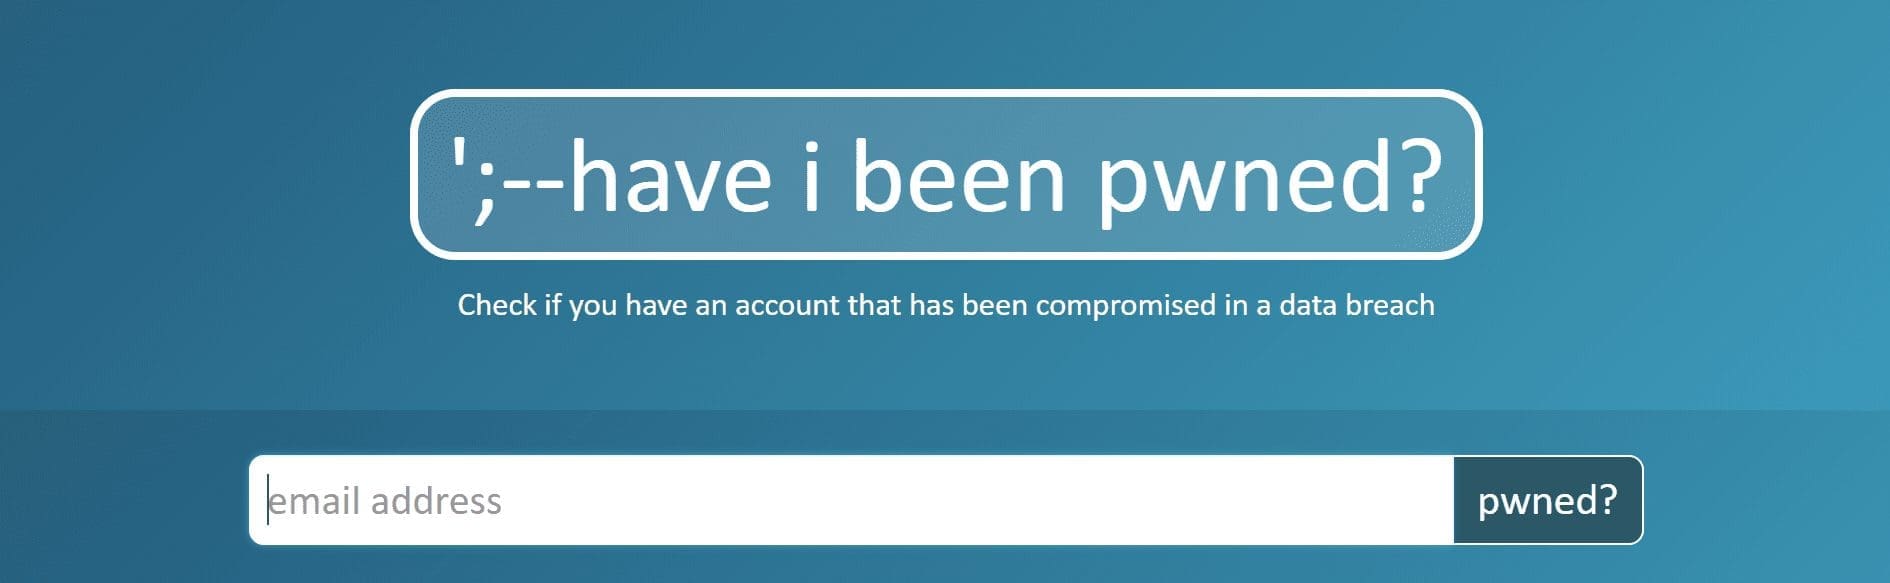 HaveIbeenpwned.png search page